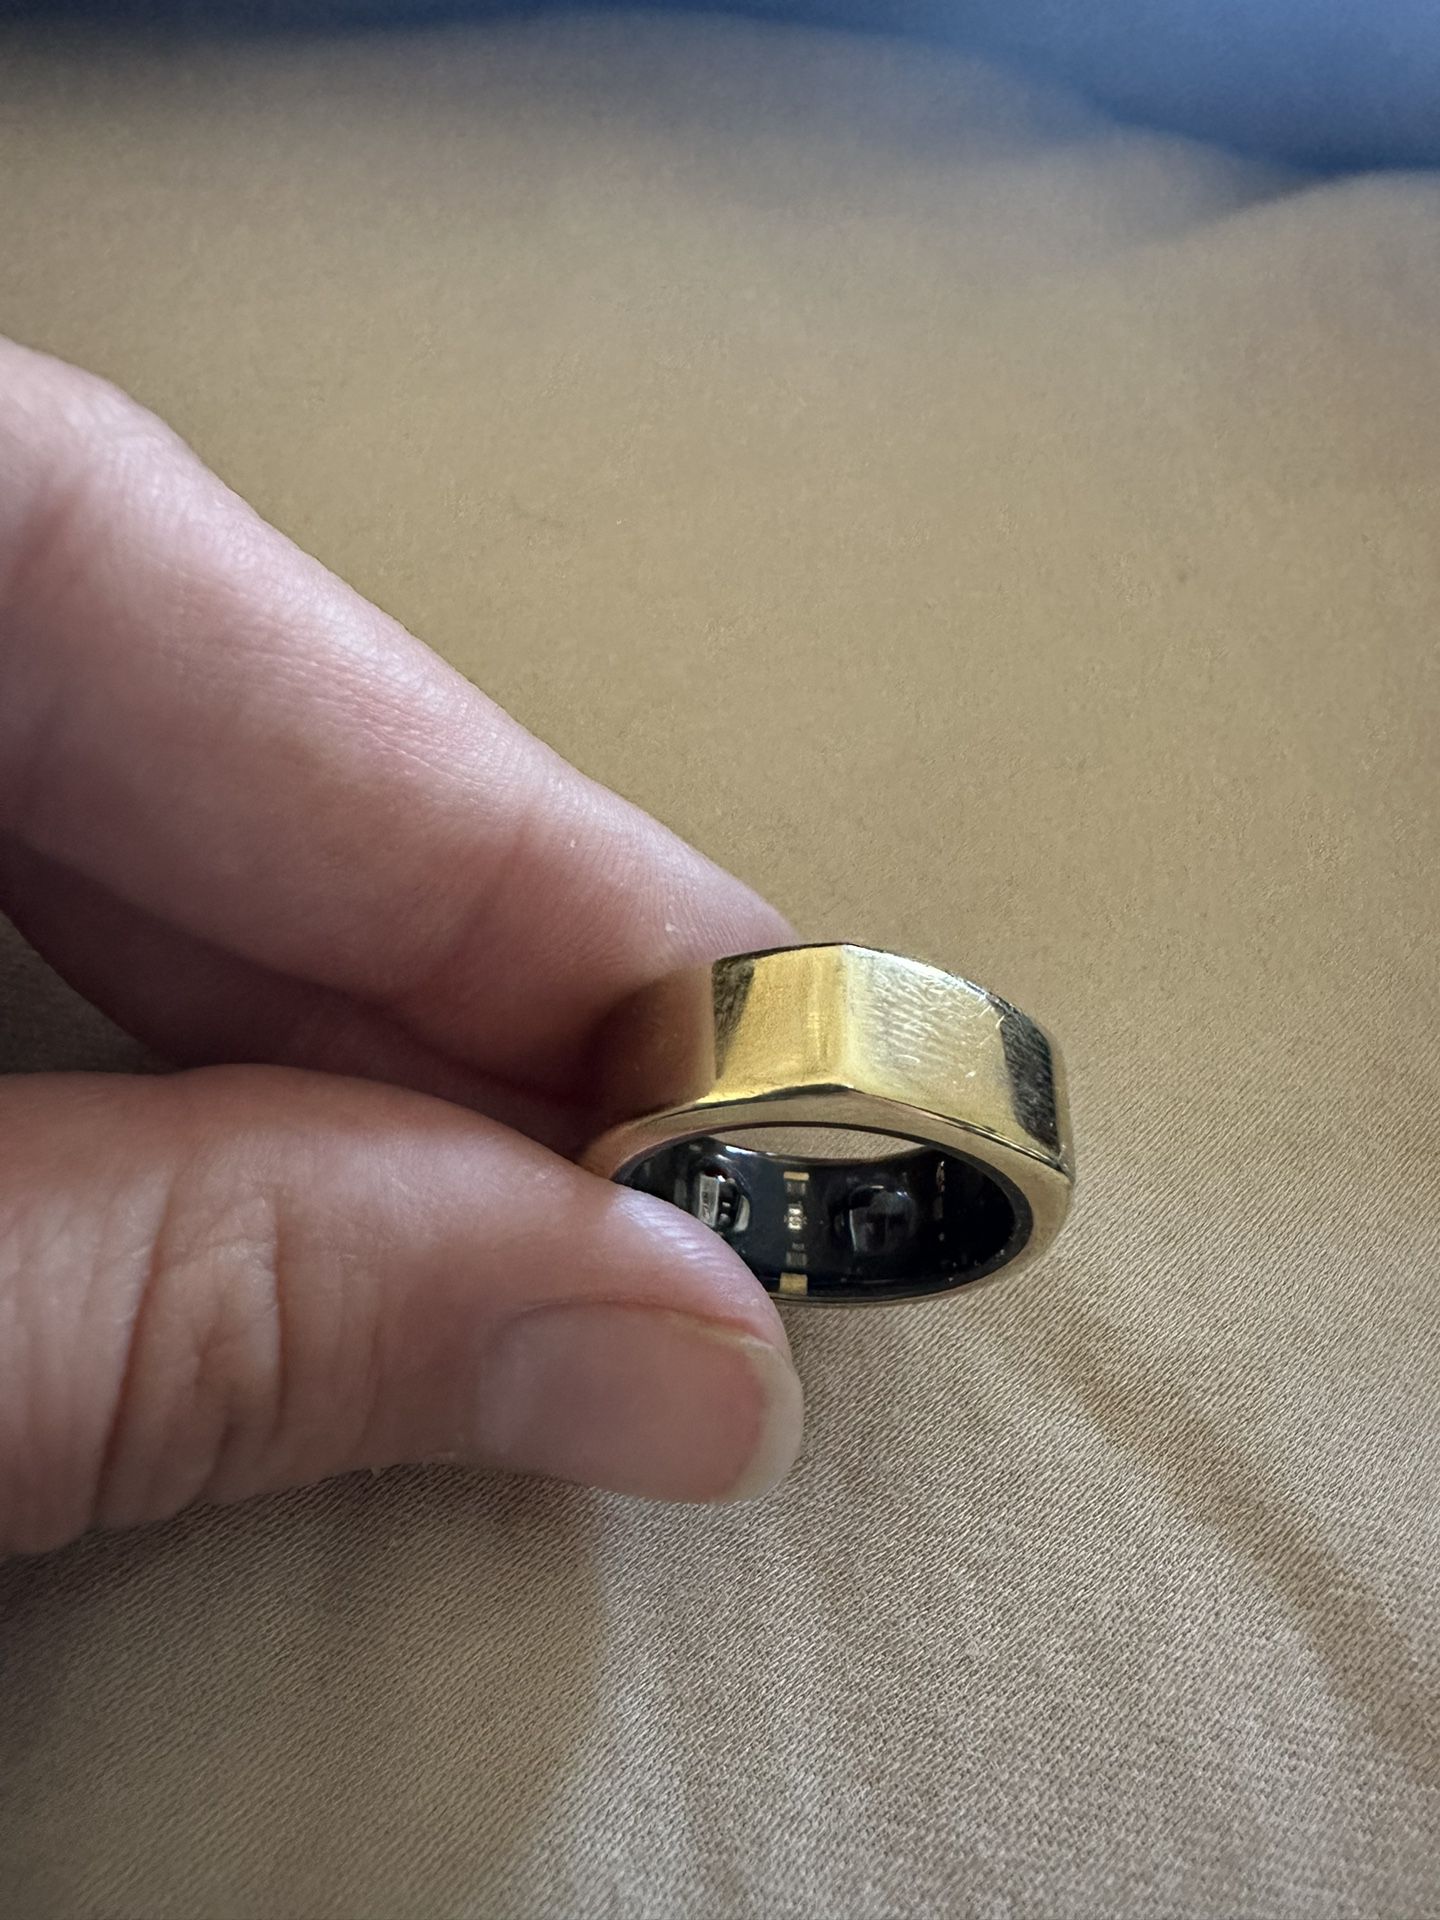 Cartier, Jewelry, Oura Ring Gen 3 Size 6